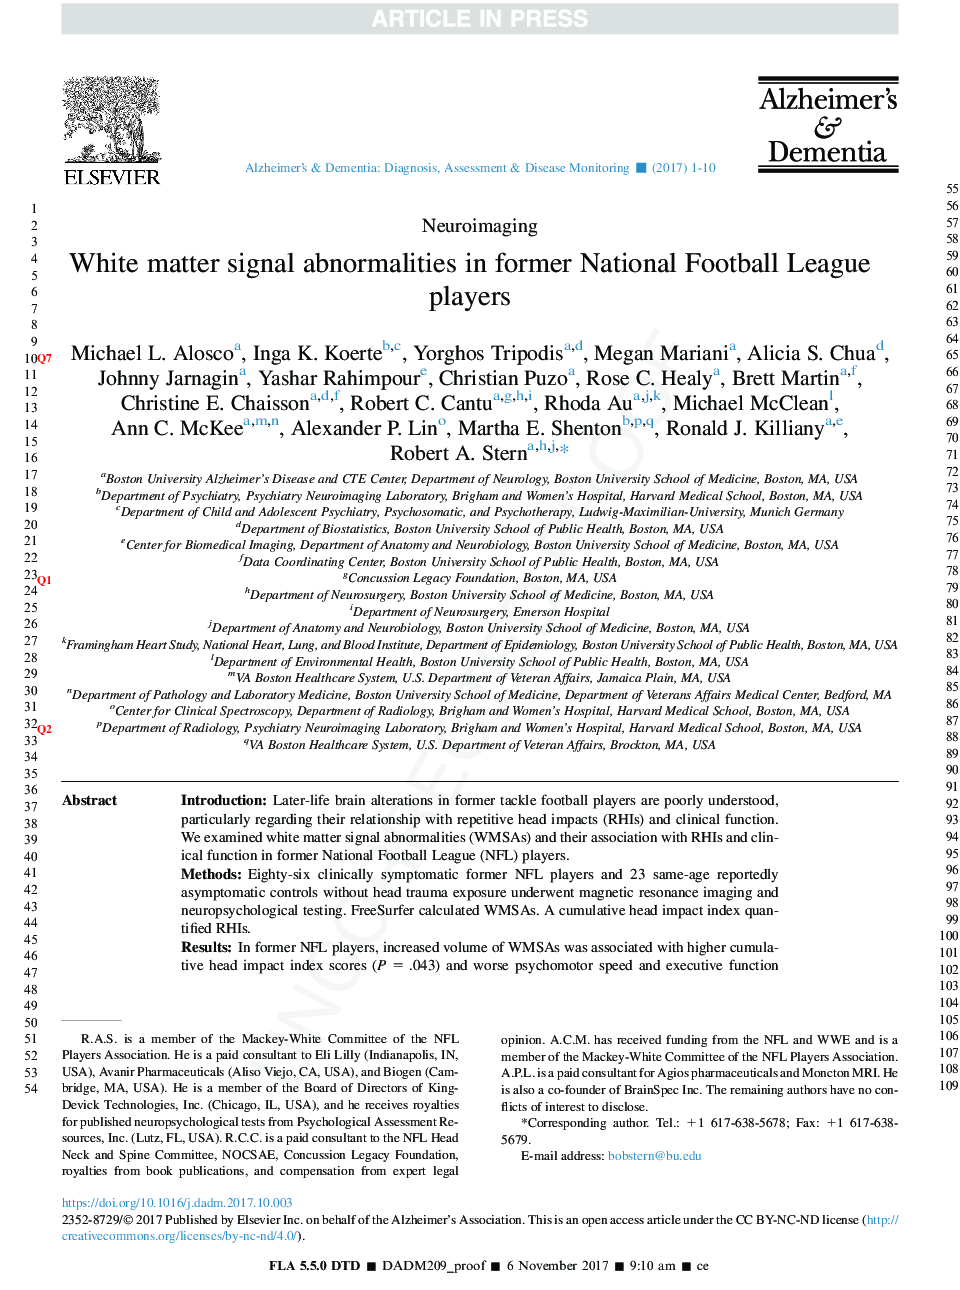 White matter signal abnormalities in former National Football League players